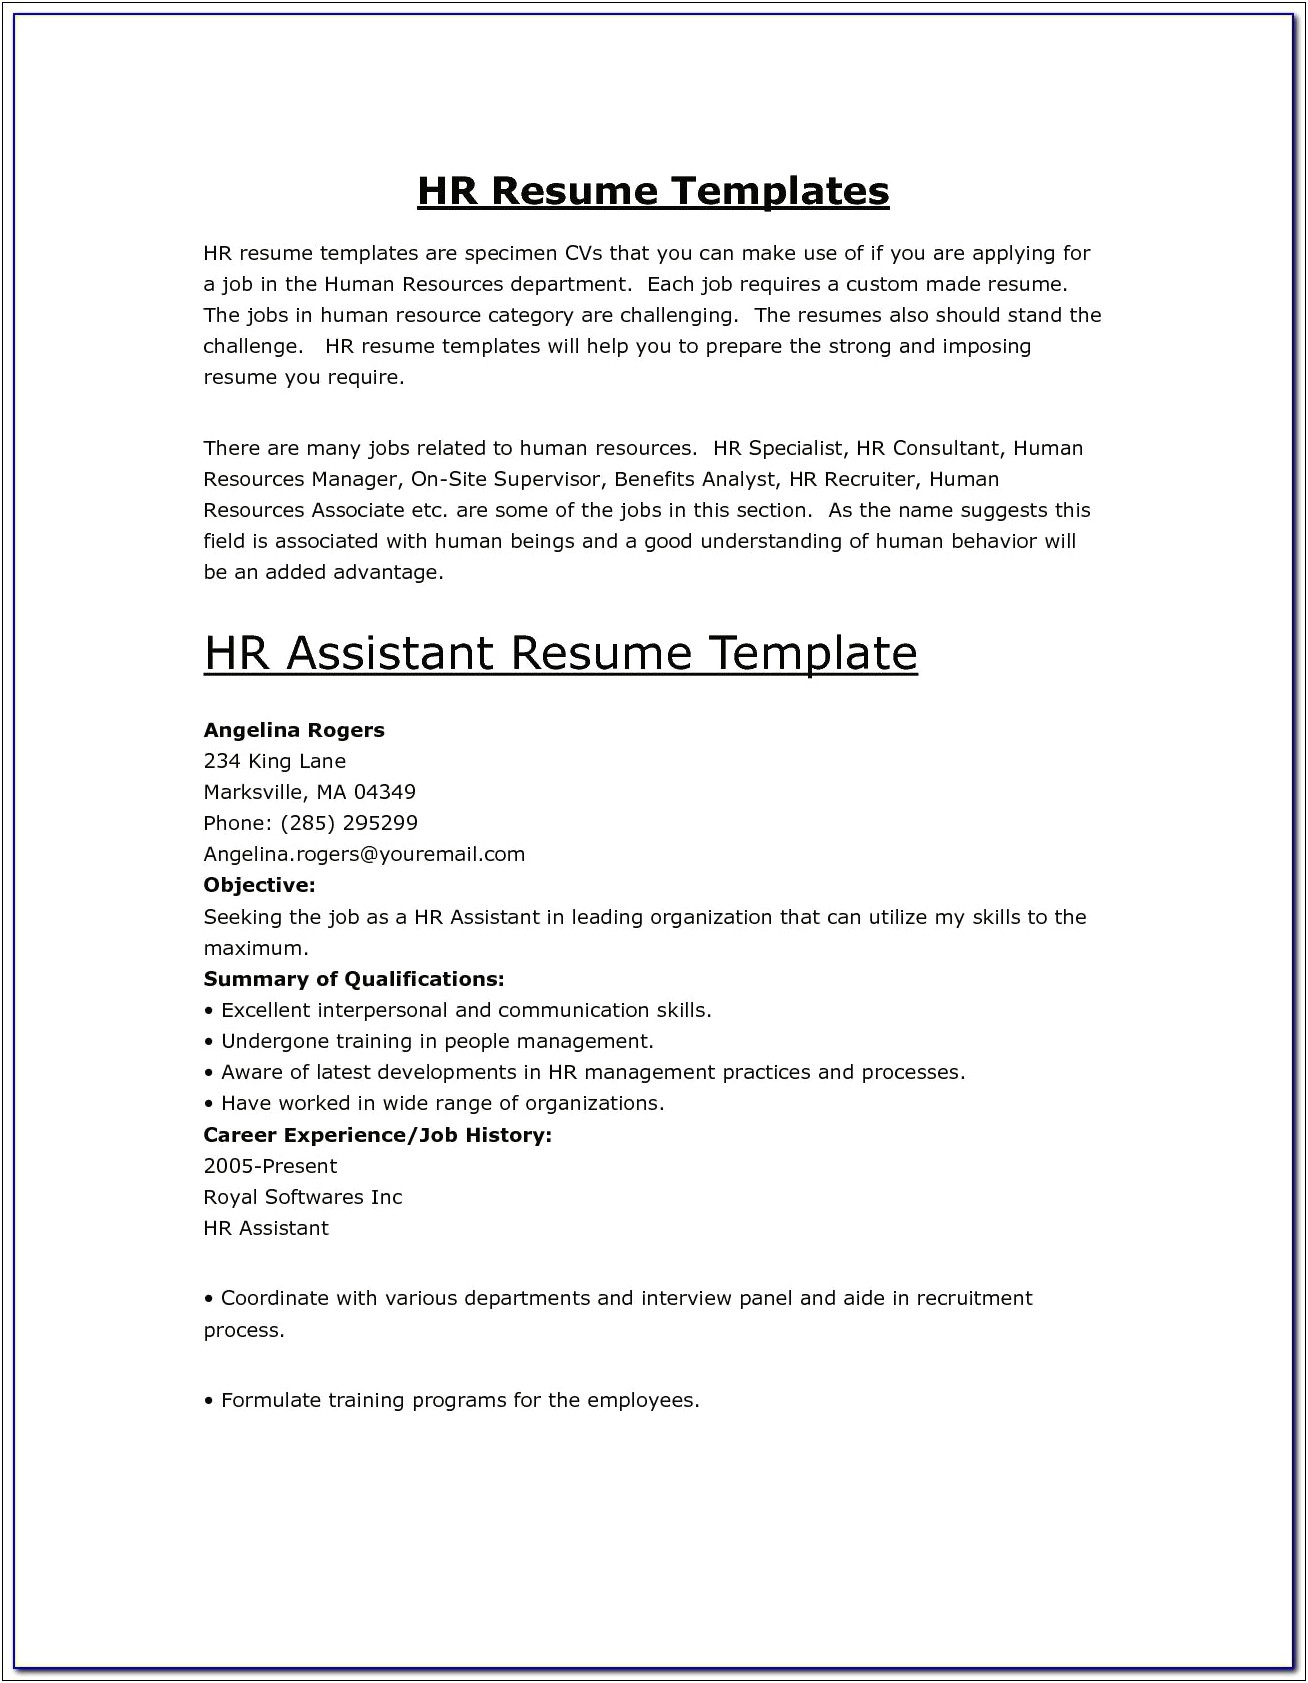 Resume Skills Examples For Human Resources Assistant